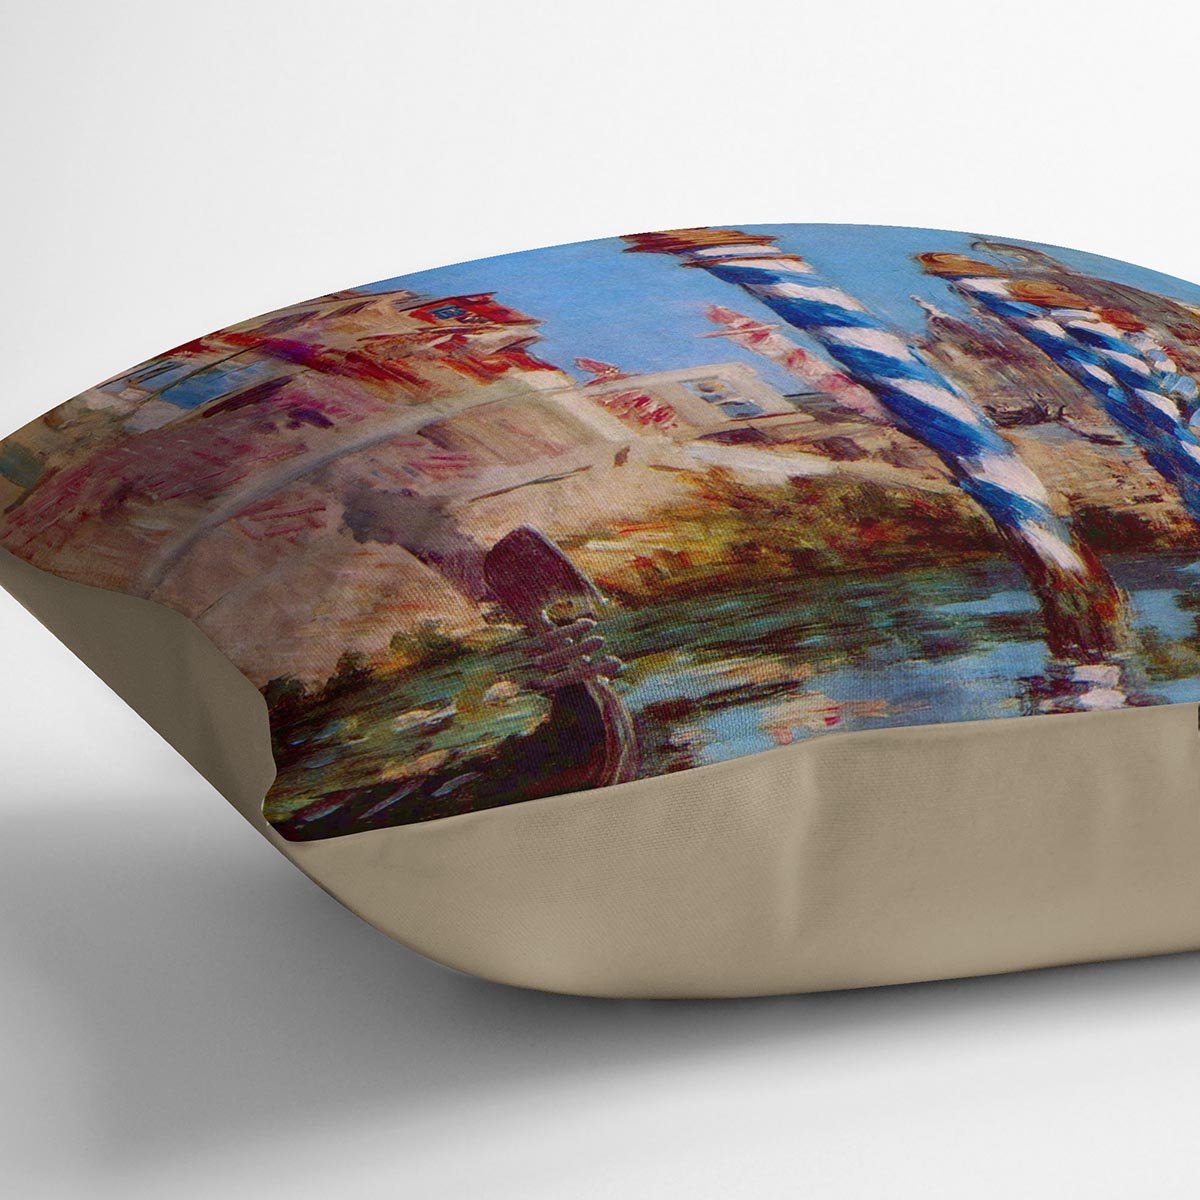 Grand Canal in Venice by Edouard Manet Throw Pillow